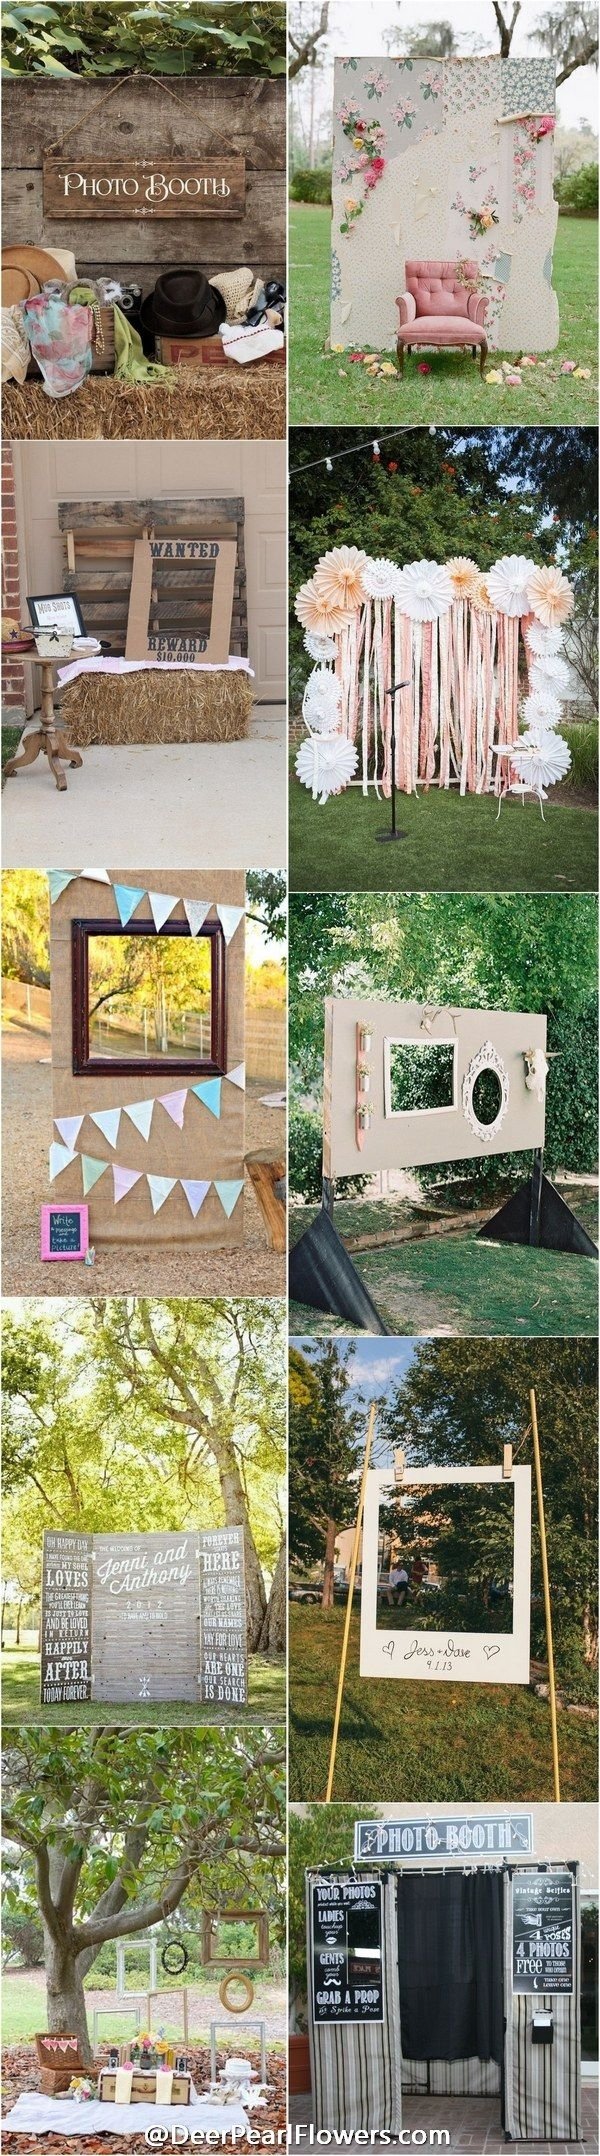 10 Most Popular Photo Booth Ideas For Weddings 20 brilliant wedding photo booth ideas photo booth backdrop 2022